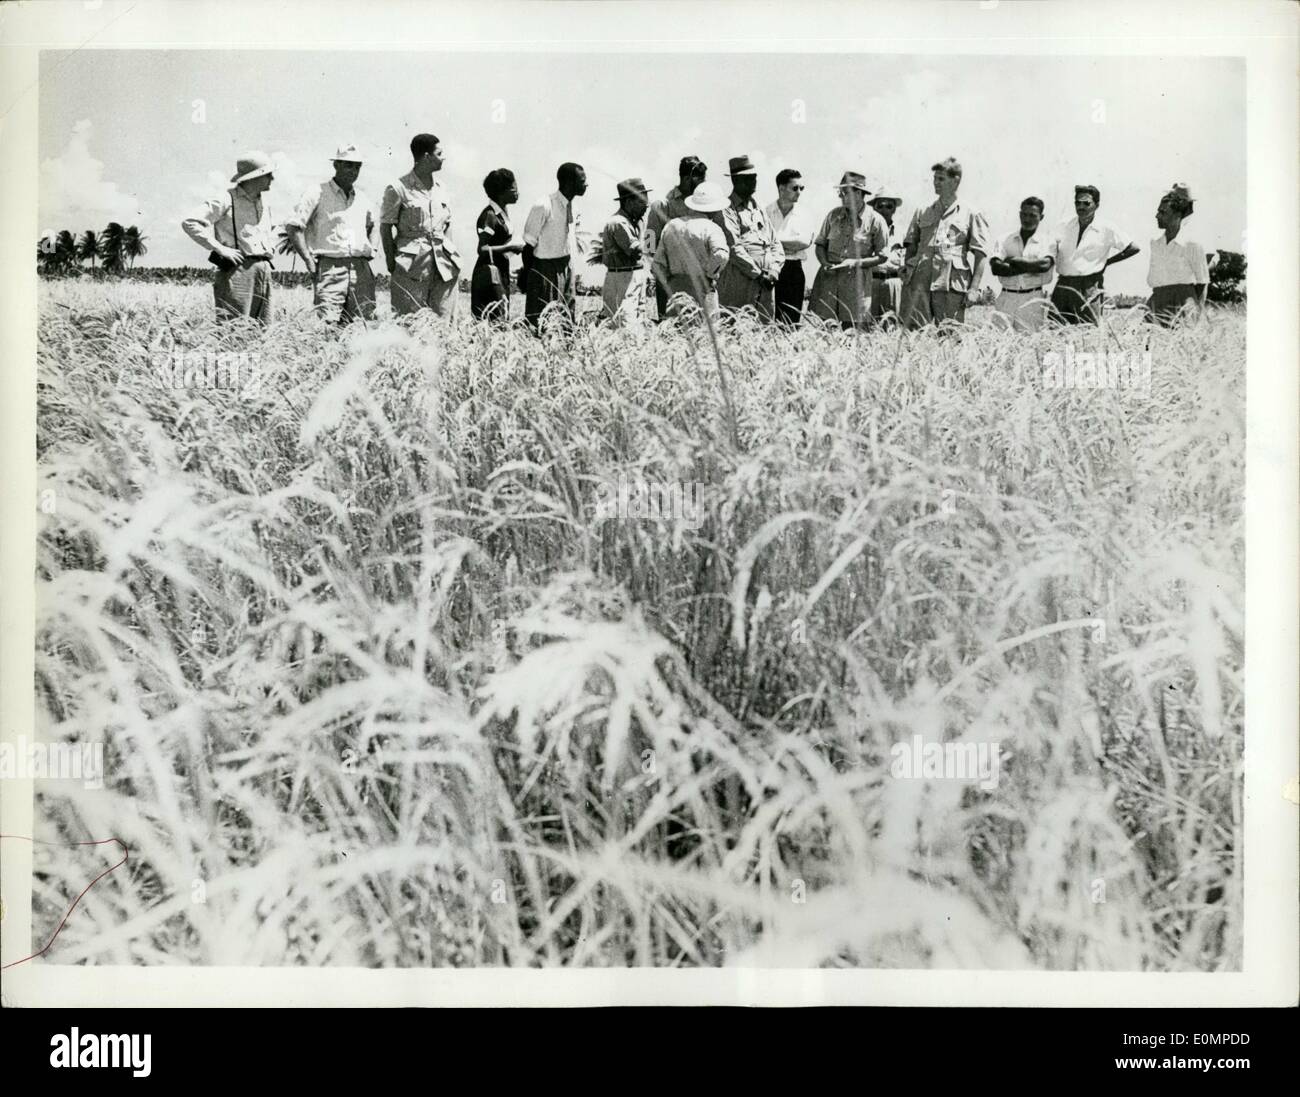 Feb. 02, 1956 - Staple Study: Under a Five Year, 42 million British development plan for British Guiana in South America, authorities are working to increase Production of rice, staple of colony's rapidly growing population, by the introduction of the Modern machinery, drainage, irrigation, cultivation and fertilization. Picture Shows Farmers and British agricultural officers knee-deep in a fire or rice at Cane Grove, British Guiana, inspect the results of the use of fertilizers. Stock Photo